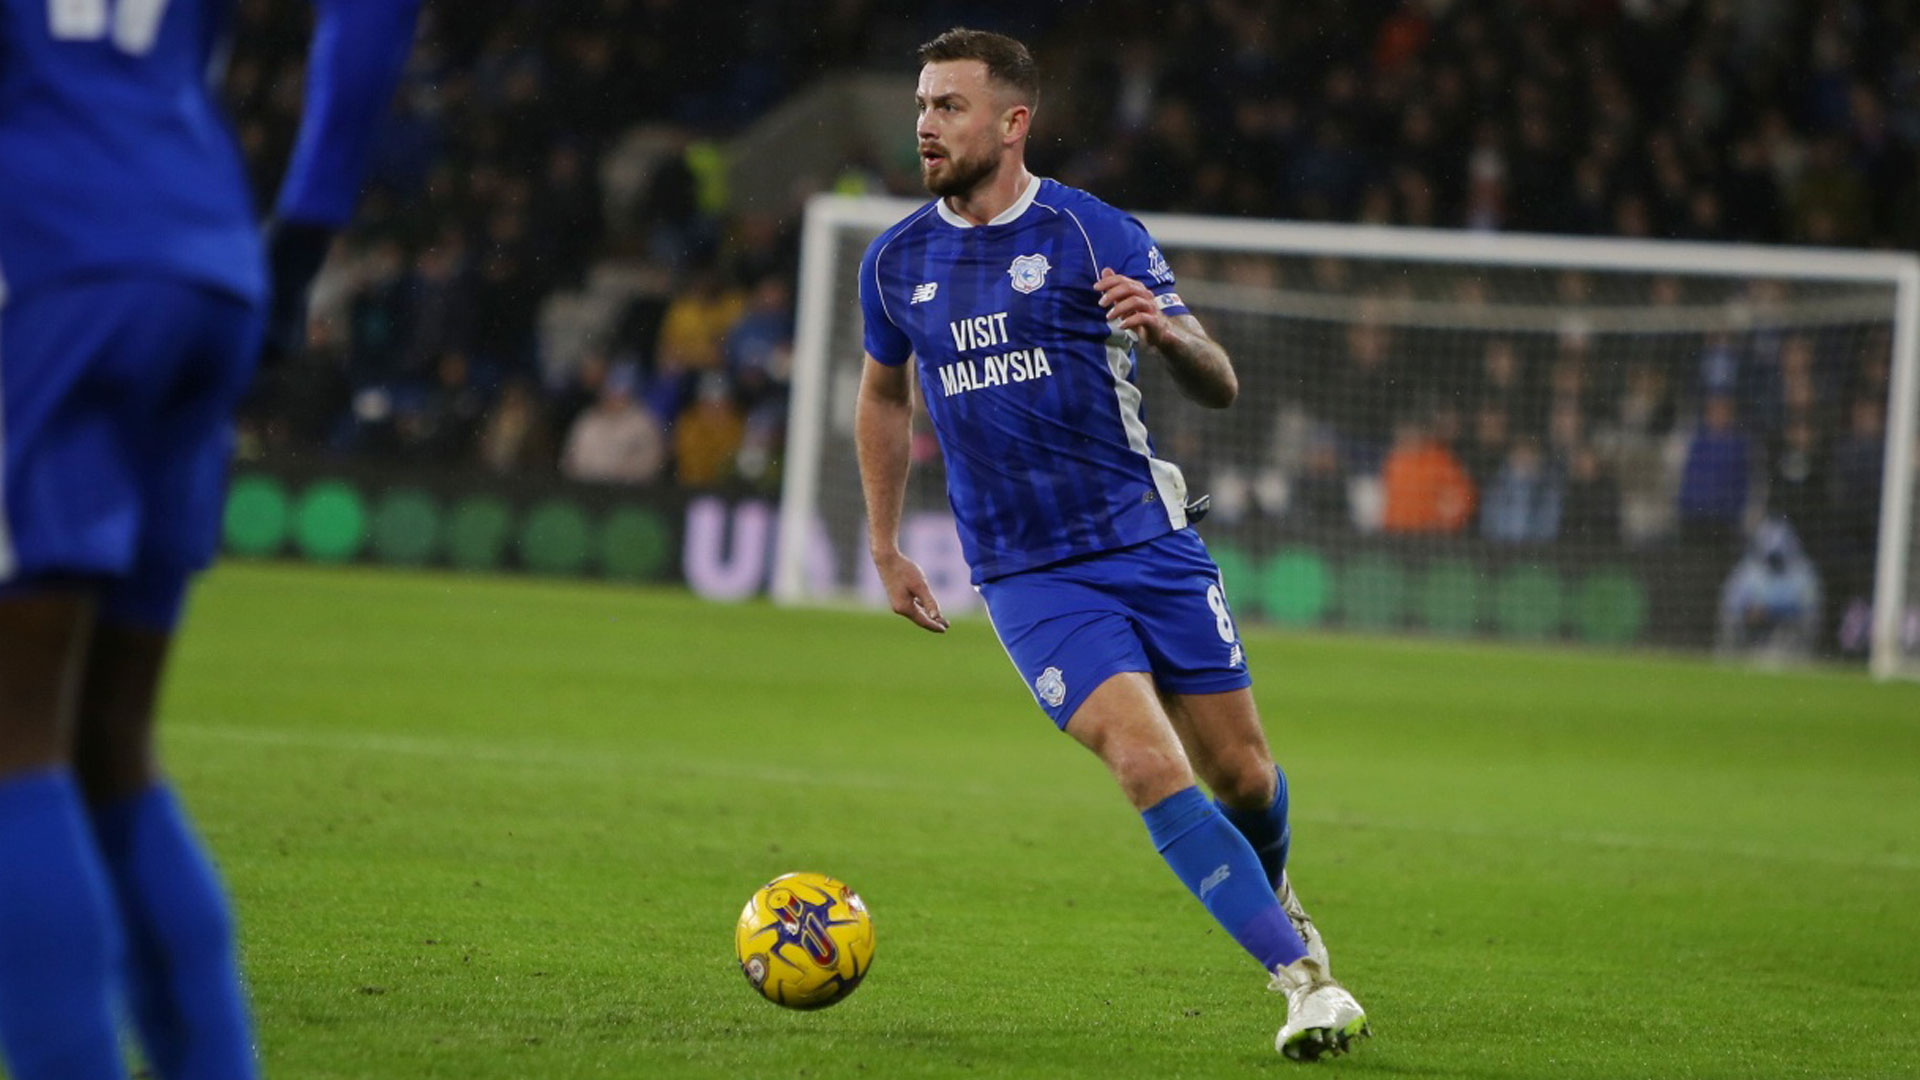 Joe Ralls in action for Cardiff City